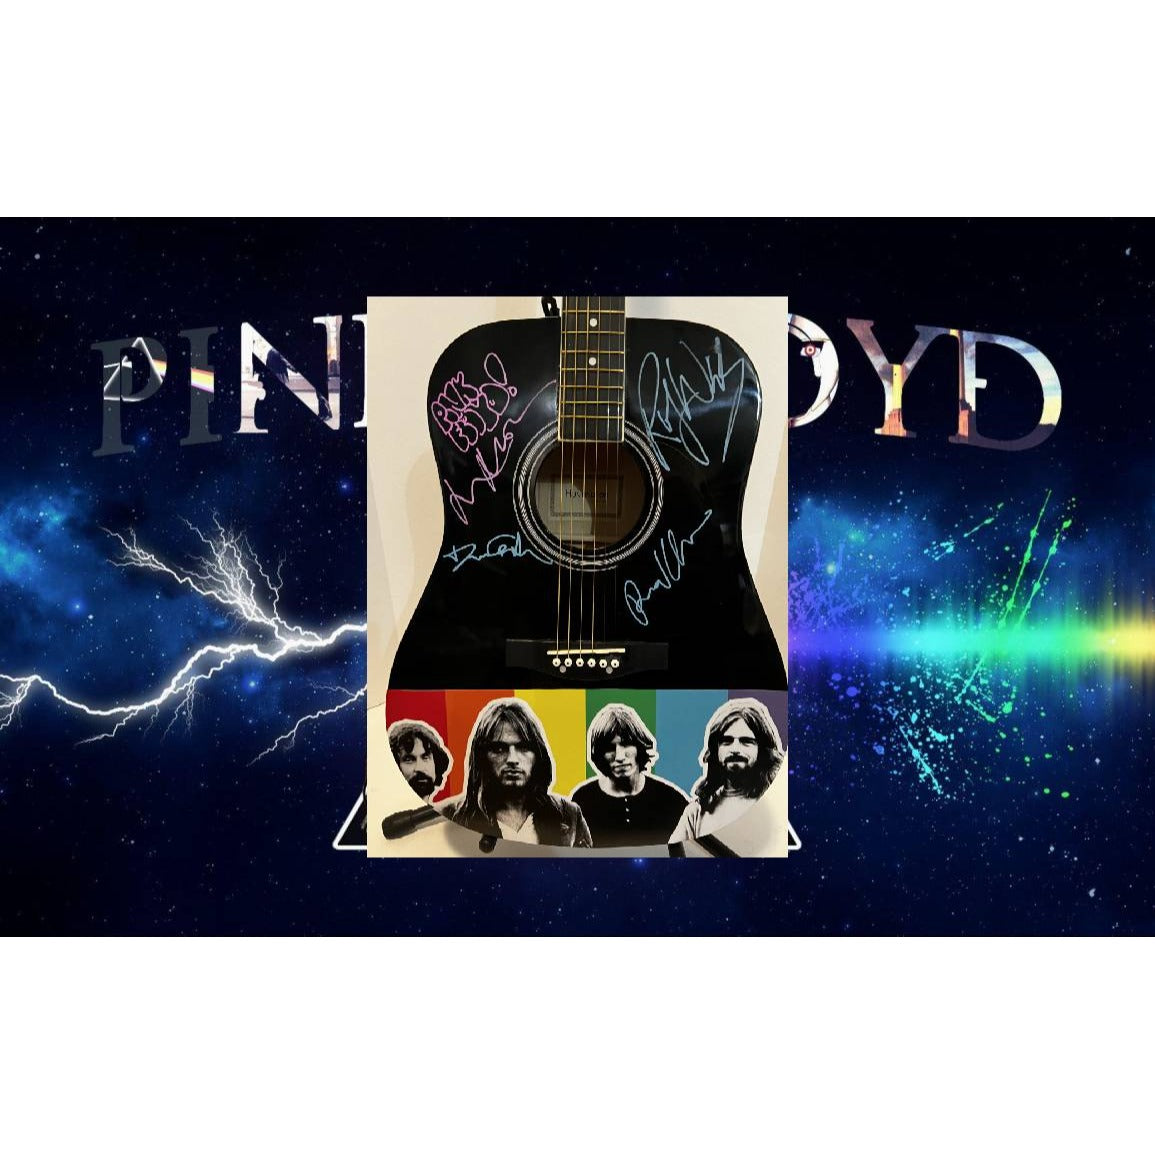 Pink Floyd David Gilmour, Roger Waters, Nick Mason and Richard Wright signed  full size acoustic guitar with proof